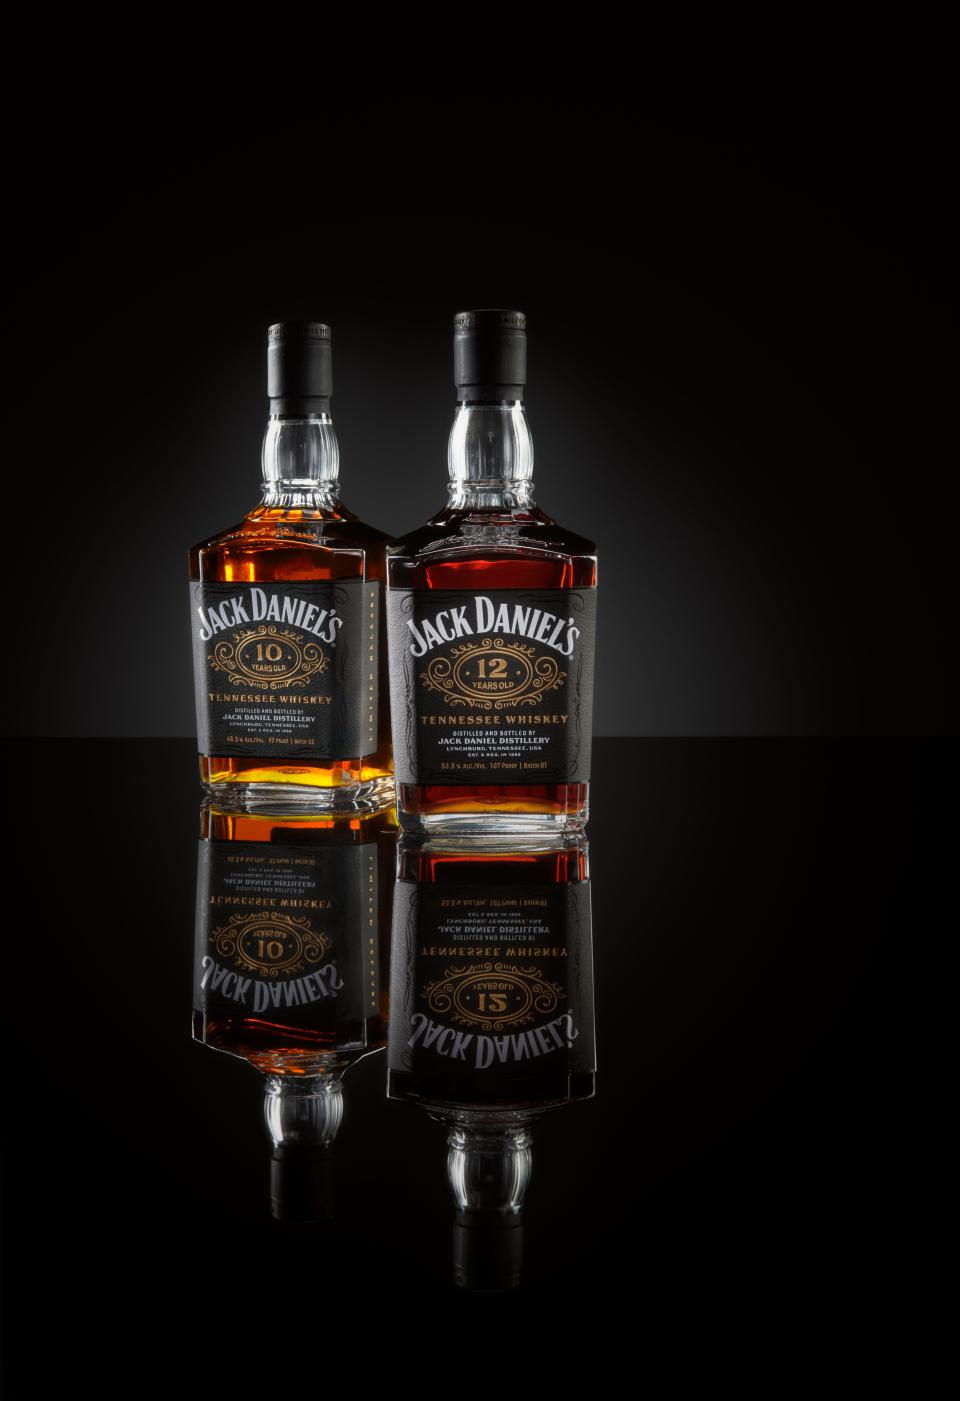 Released in March, Jack Daniel’s Aged Series limited edition releases: Batch 2 of its 10-Year-Old Tennessee Whiskey, at left, and 12-Year-Old Tennessee Whiskey; suggested retail prices of $80 and $70, respectively.